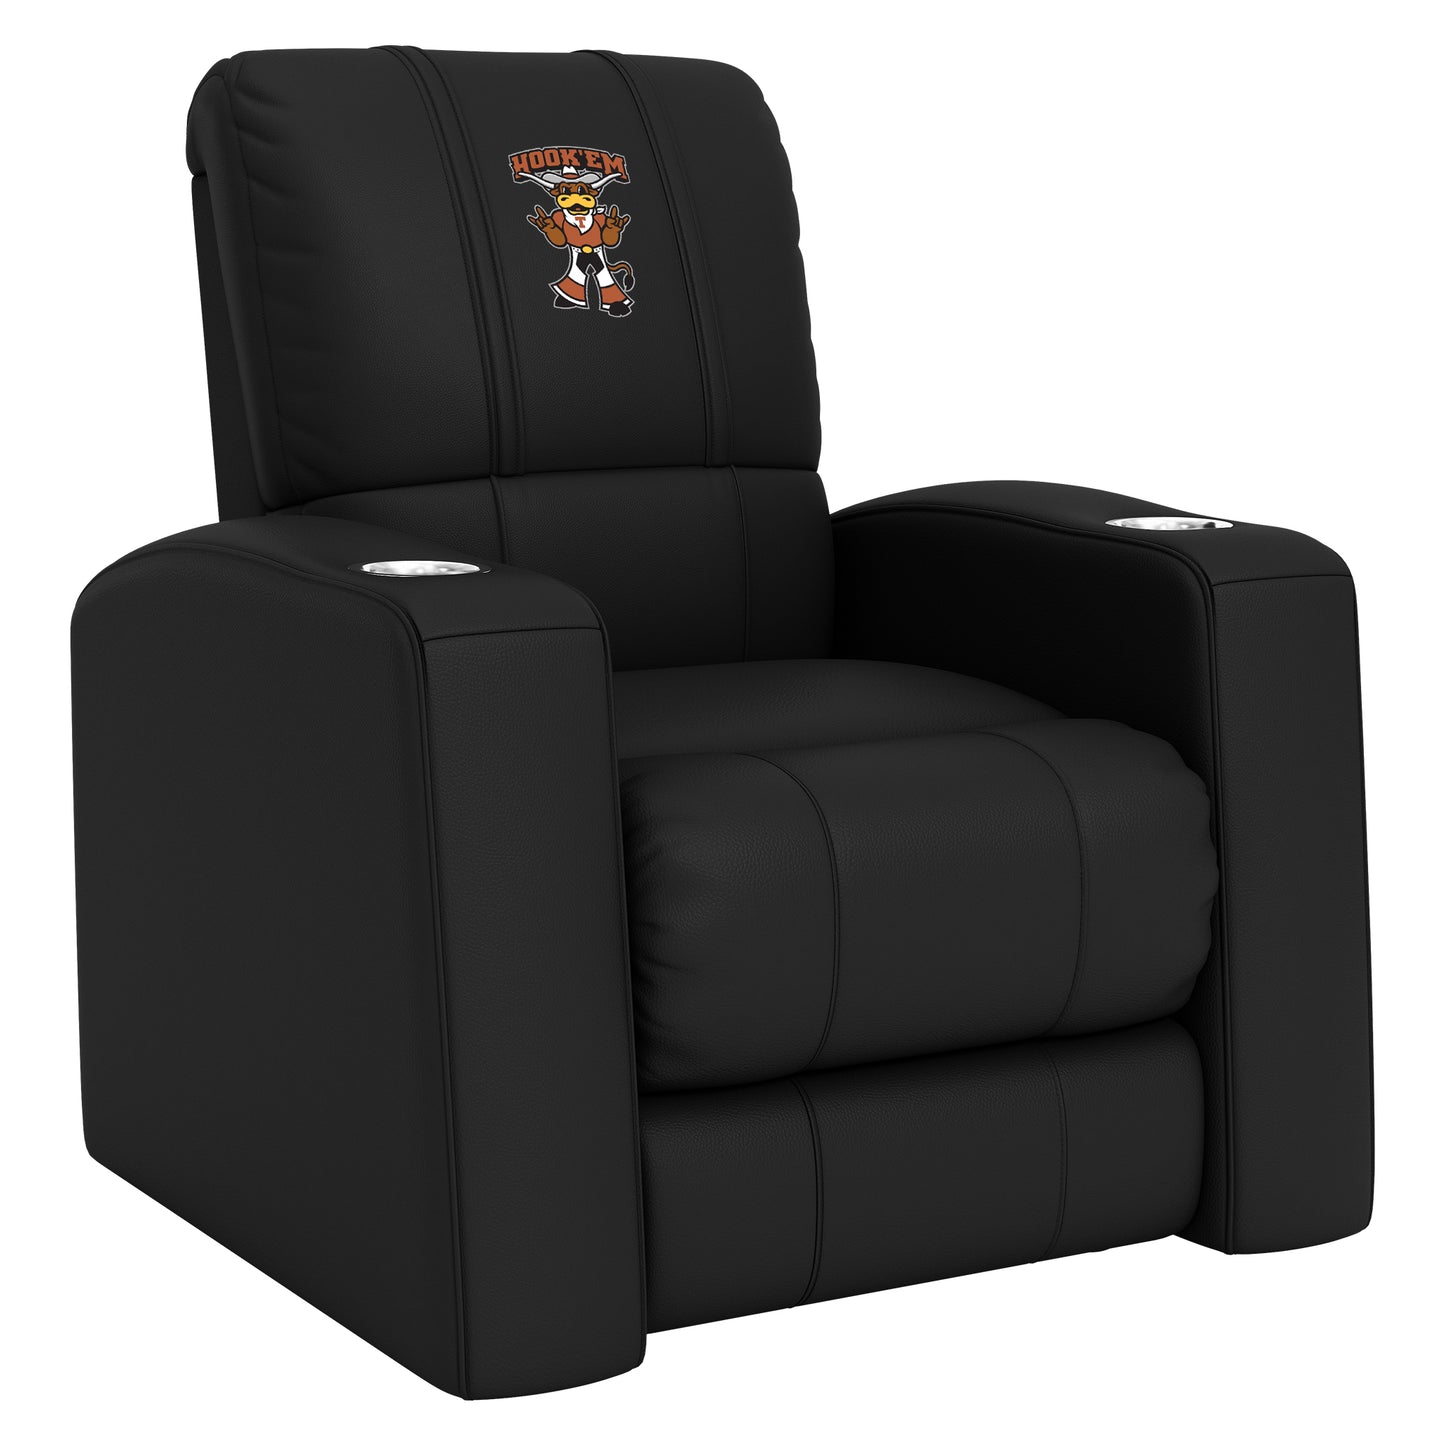 Relax Home Theater Recliner with Texas Longhorns Alternate